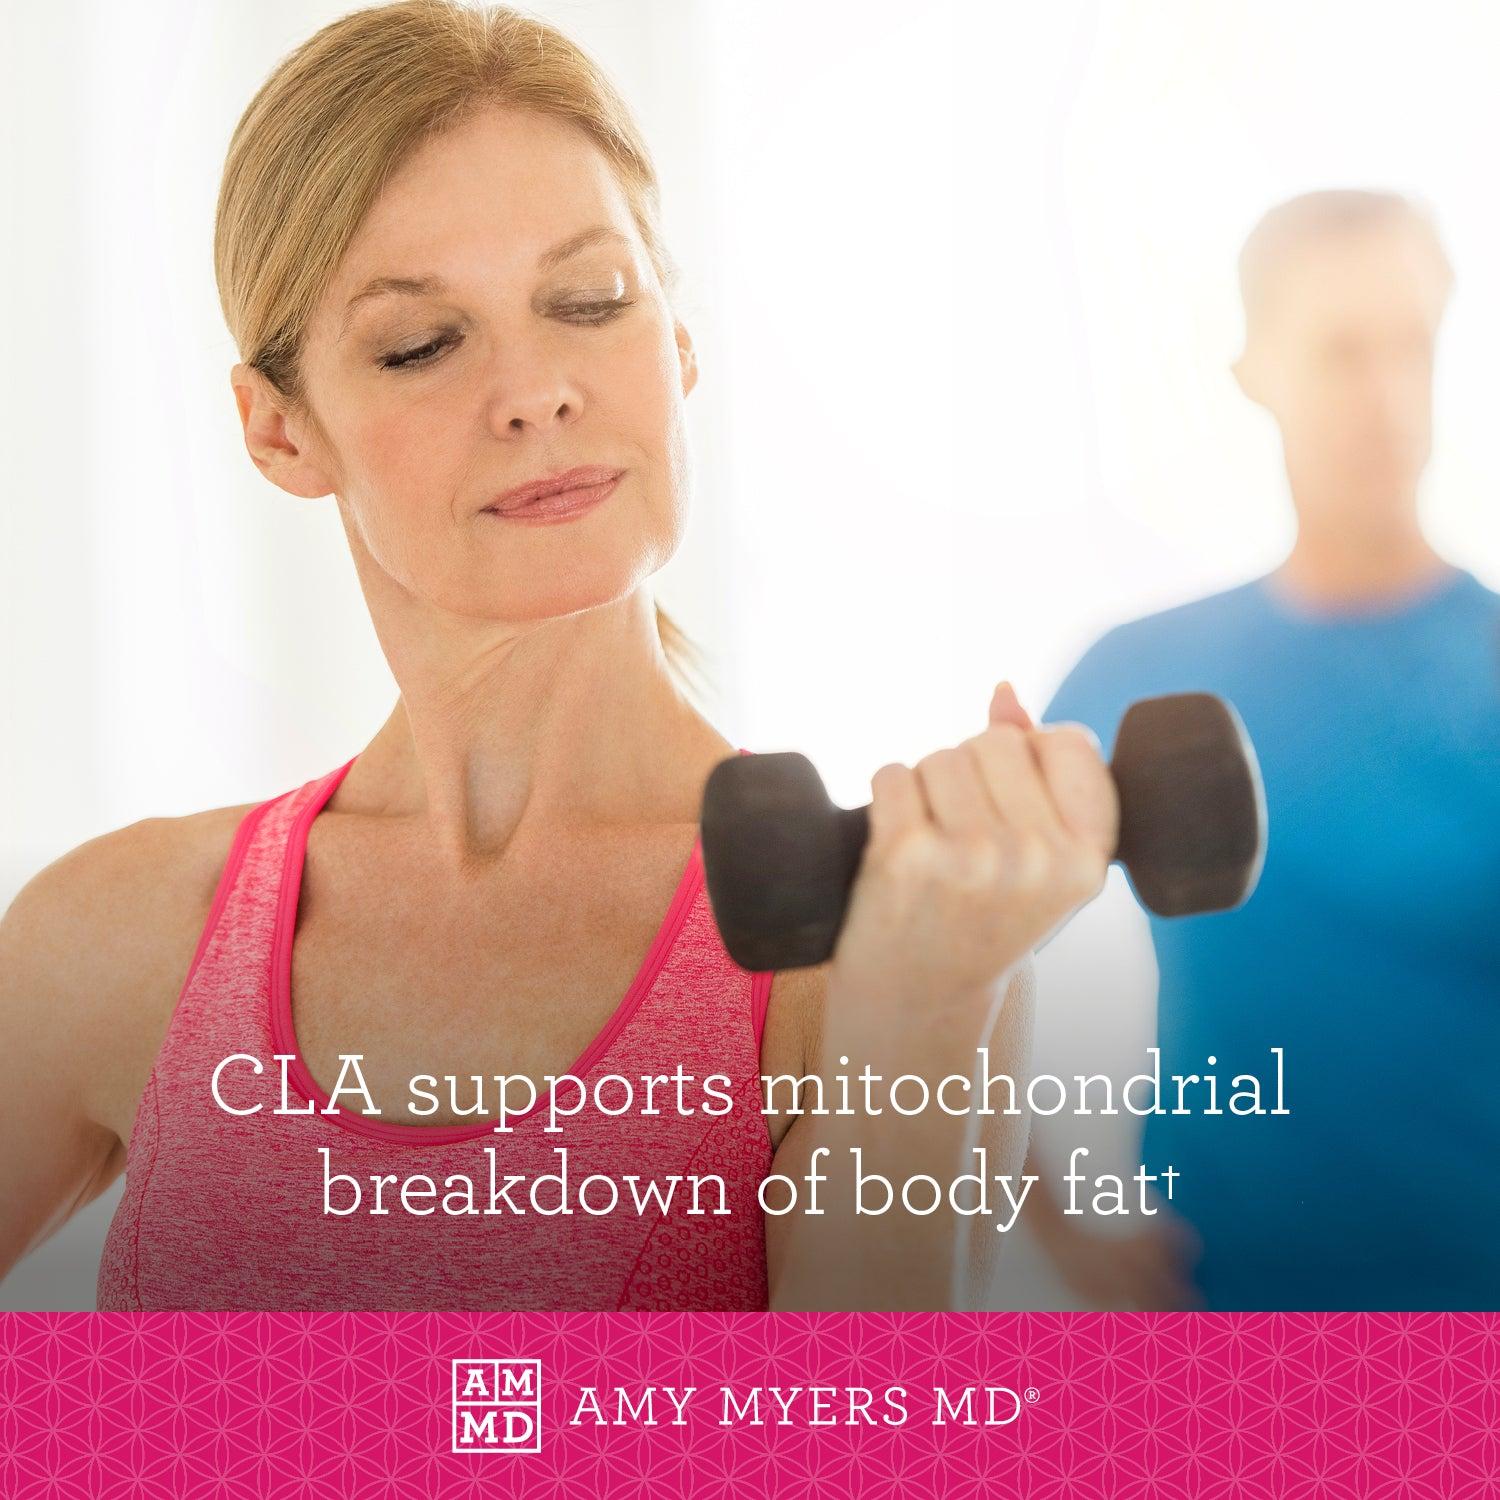 Woman working out - CLA supports mytochondrial breakdown of body fat - Amy Myers MD®